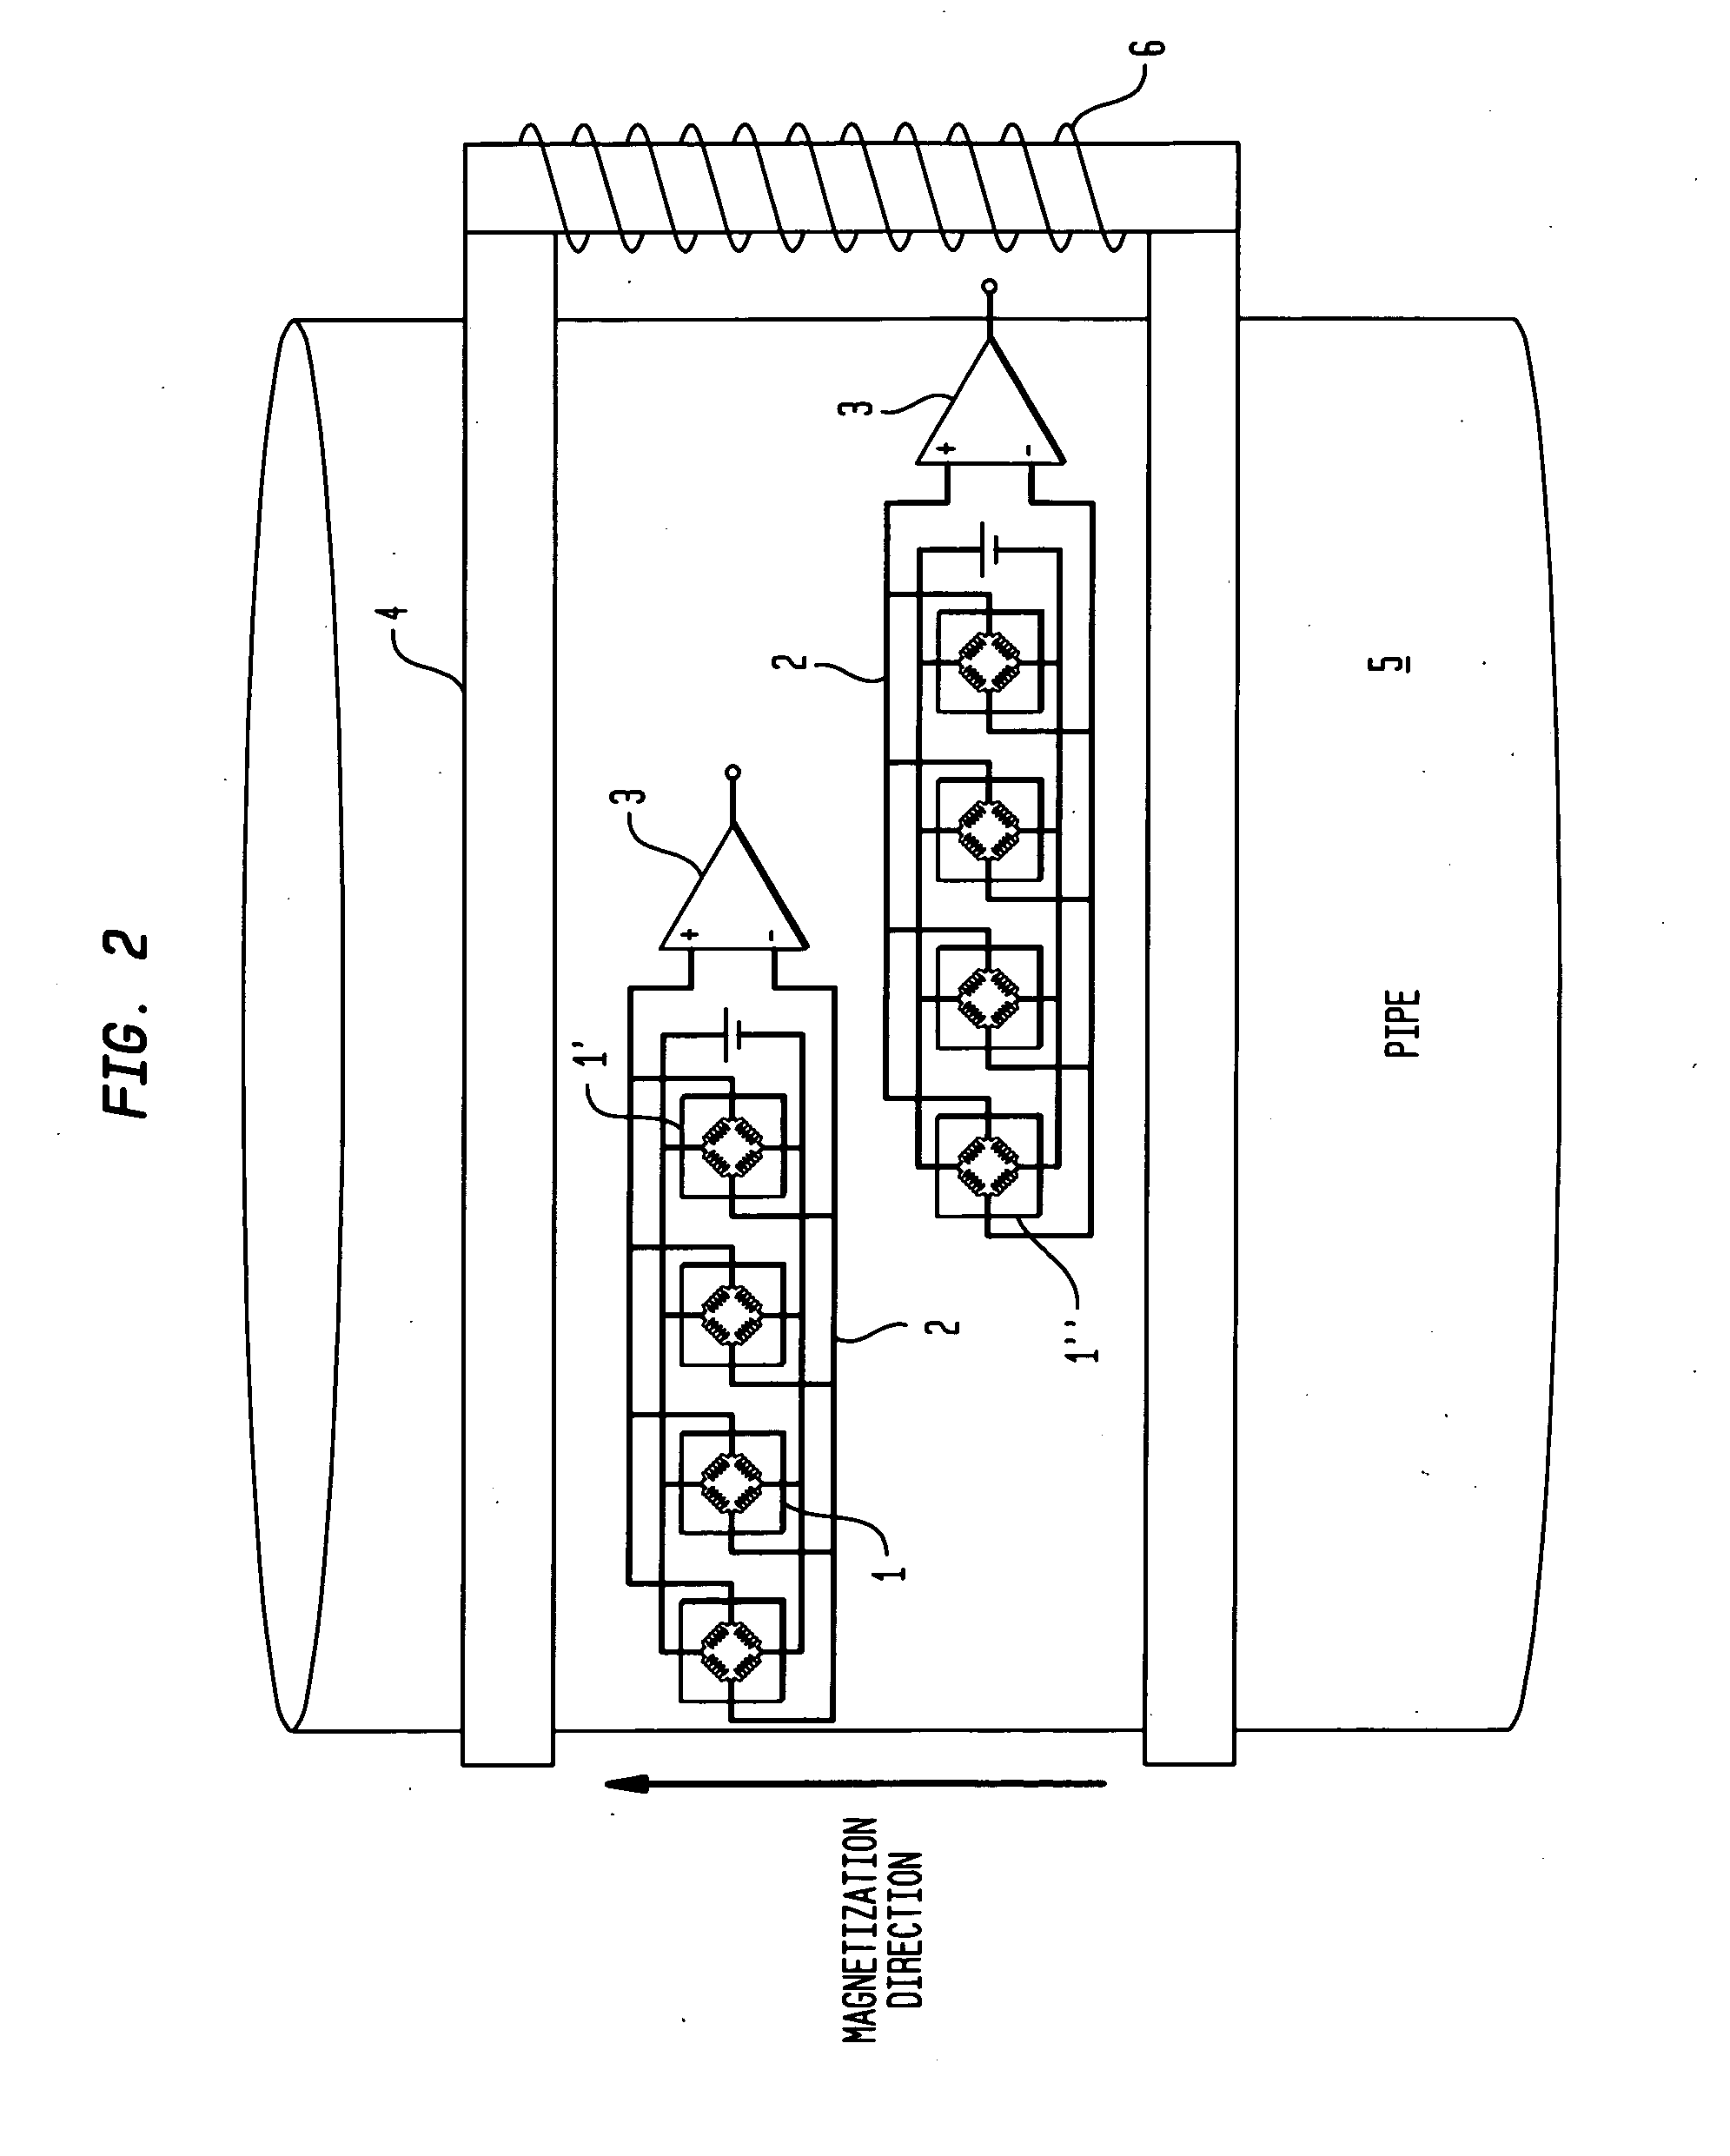 Device for nondestructive testing of pipes